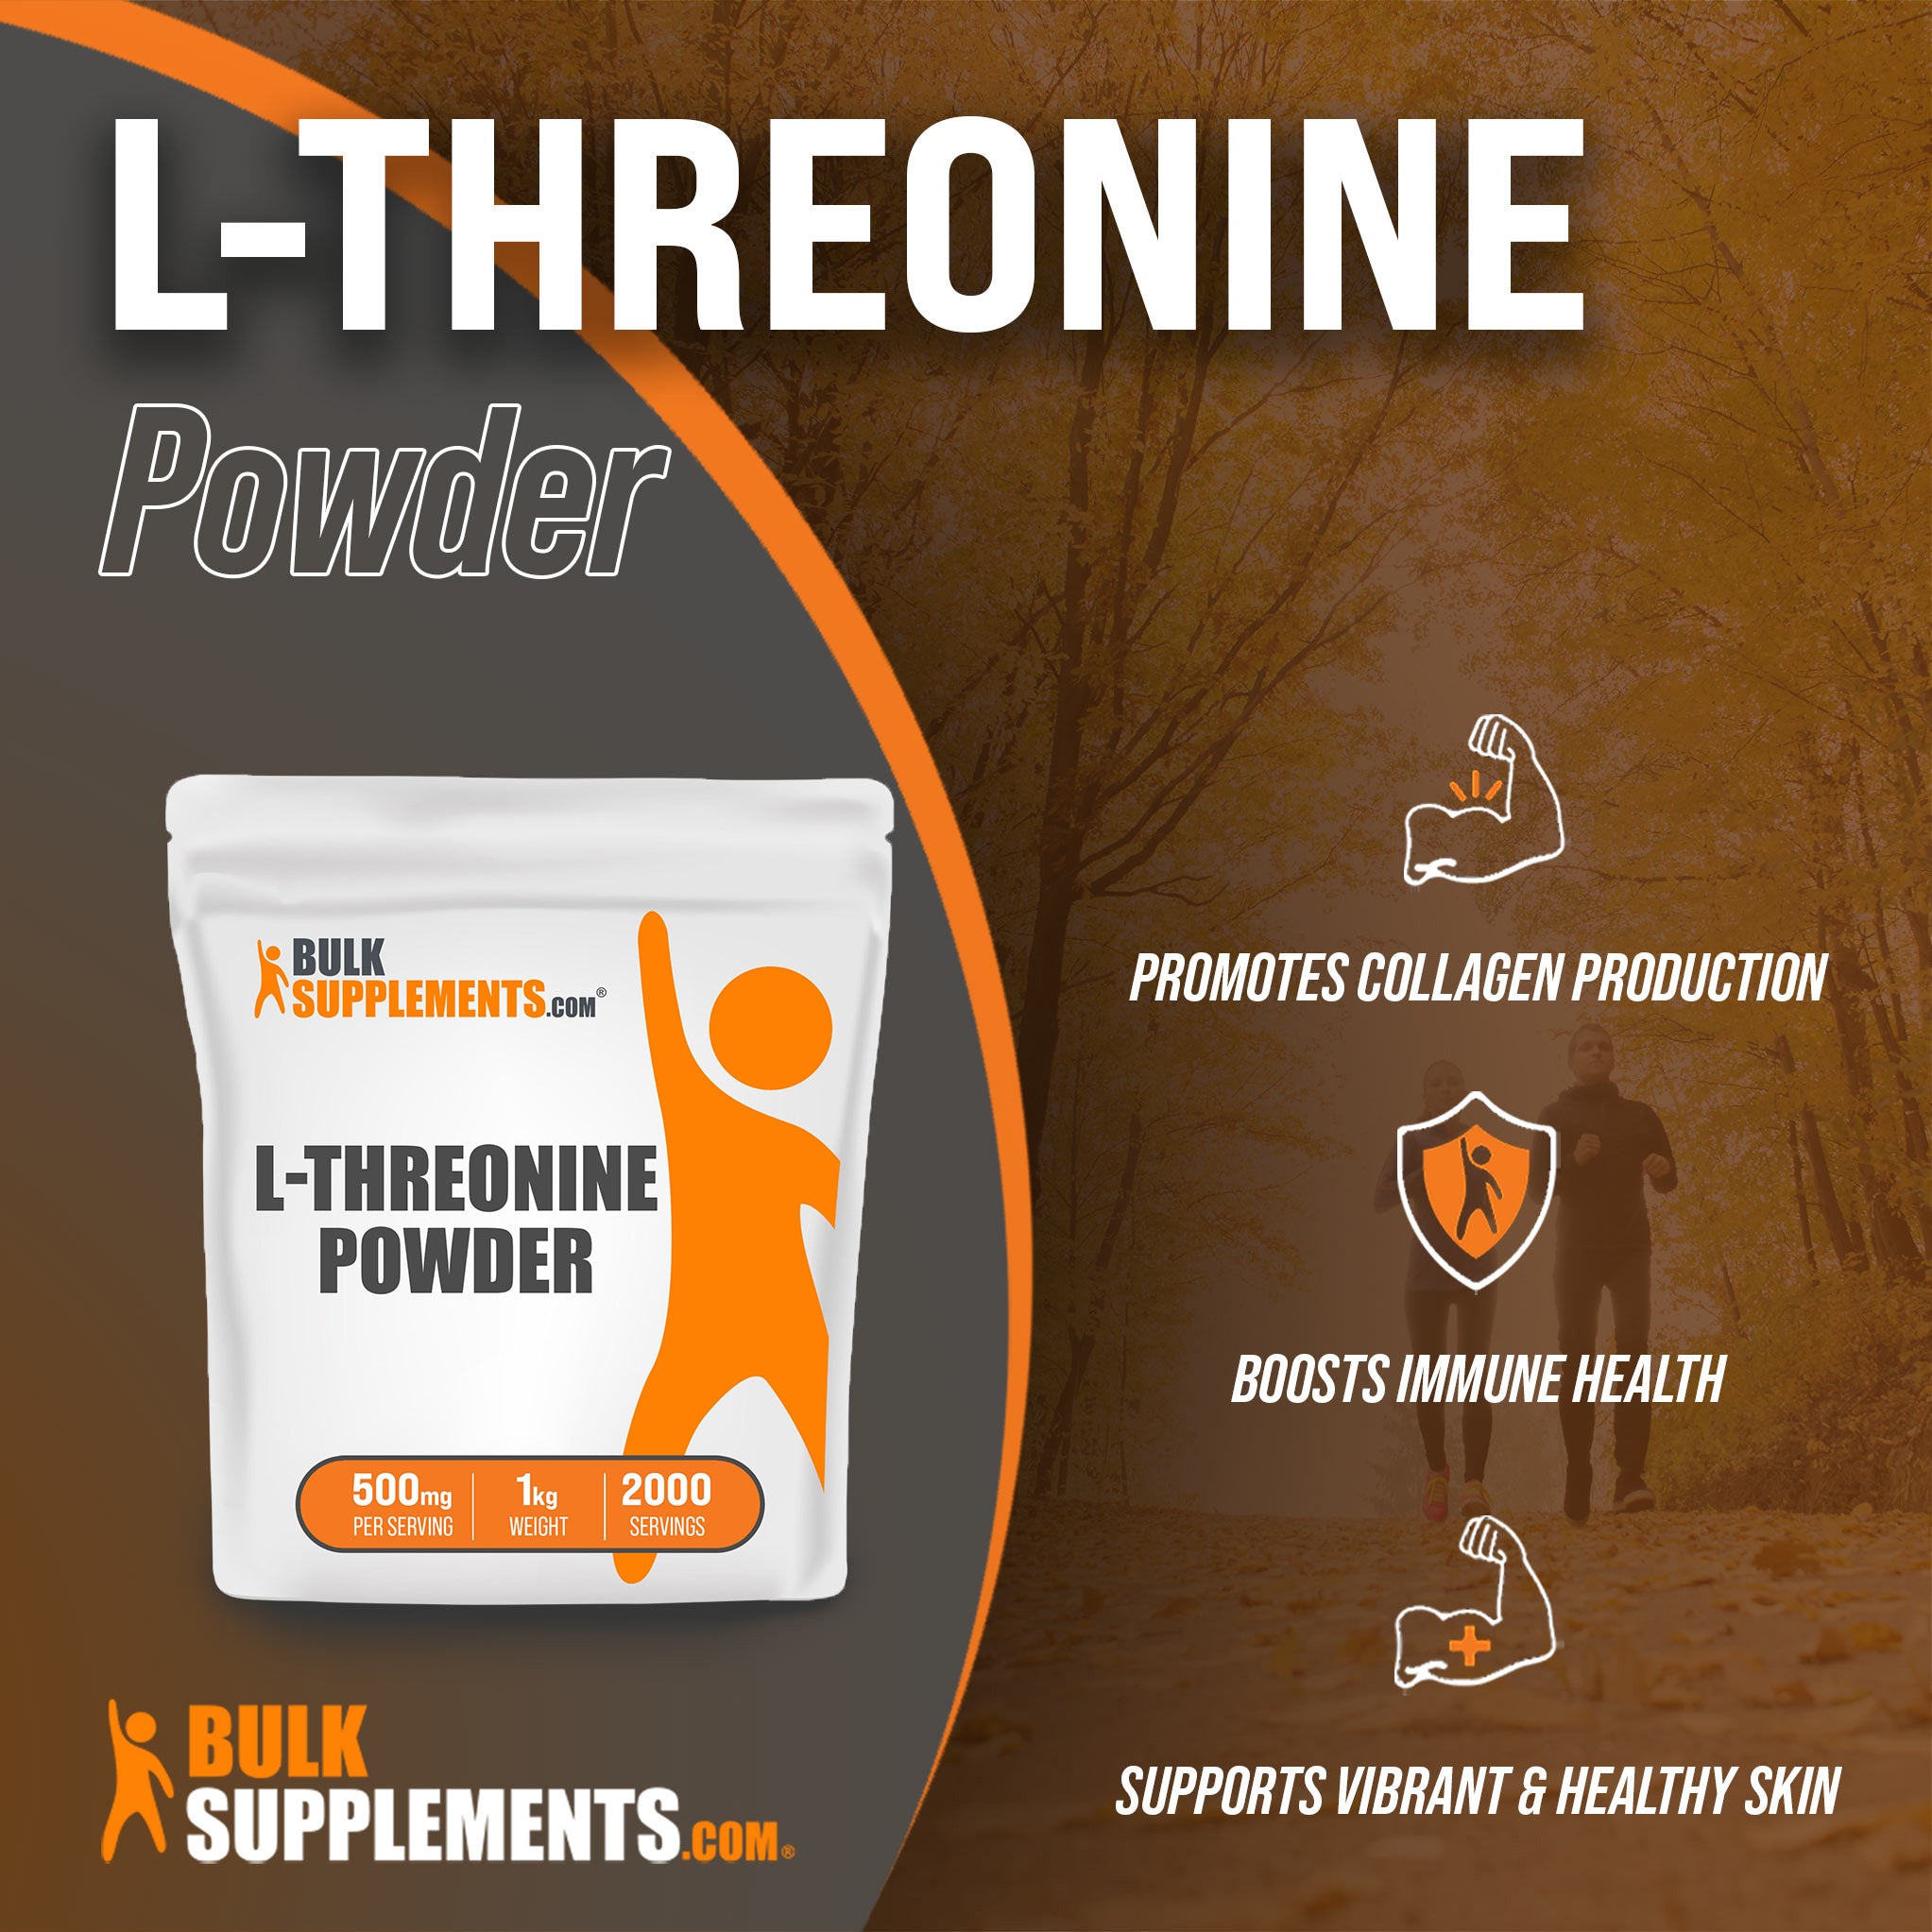 Benefits of L-Threonine: promotes collagen production, boosts immune health, supports vibrant and healthy skin